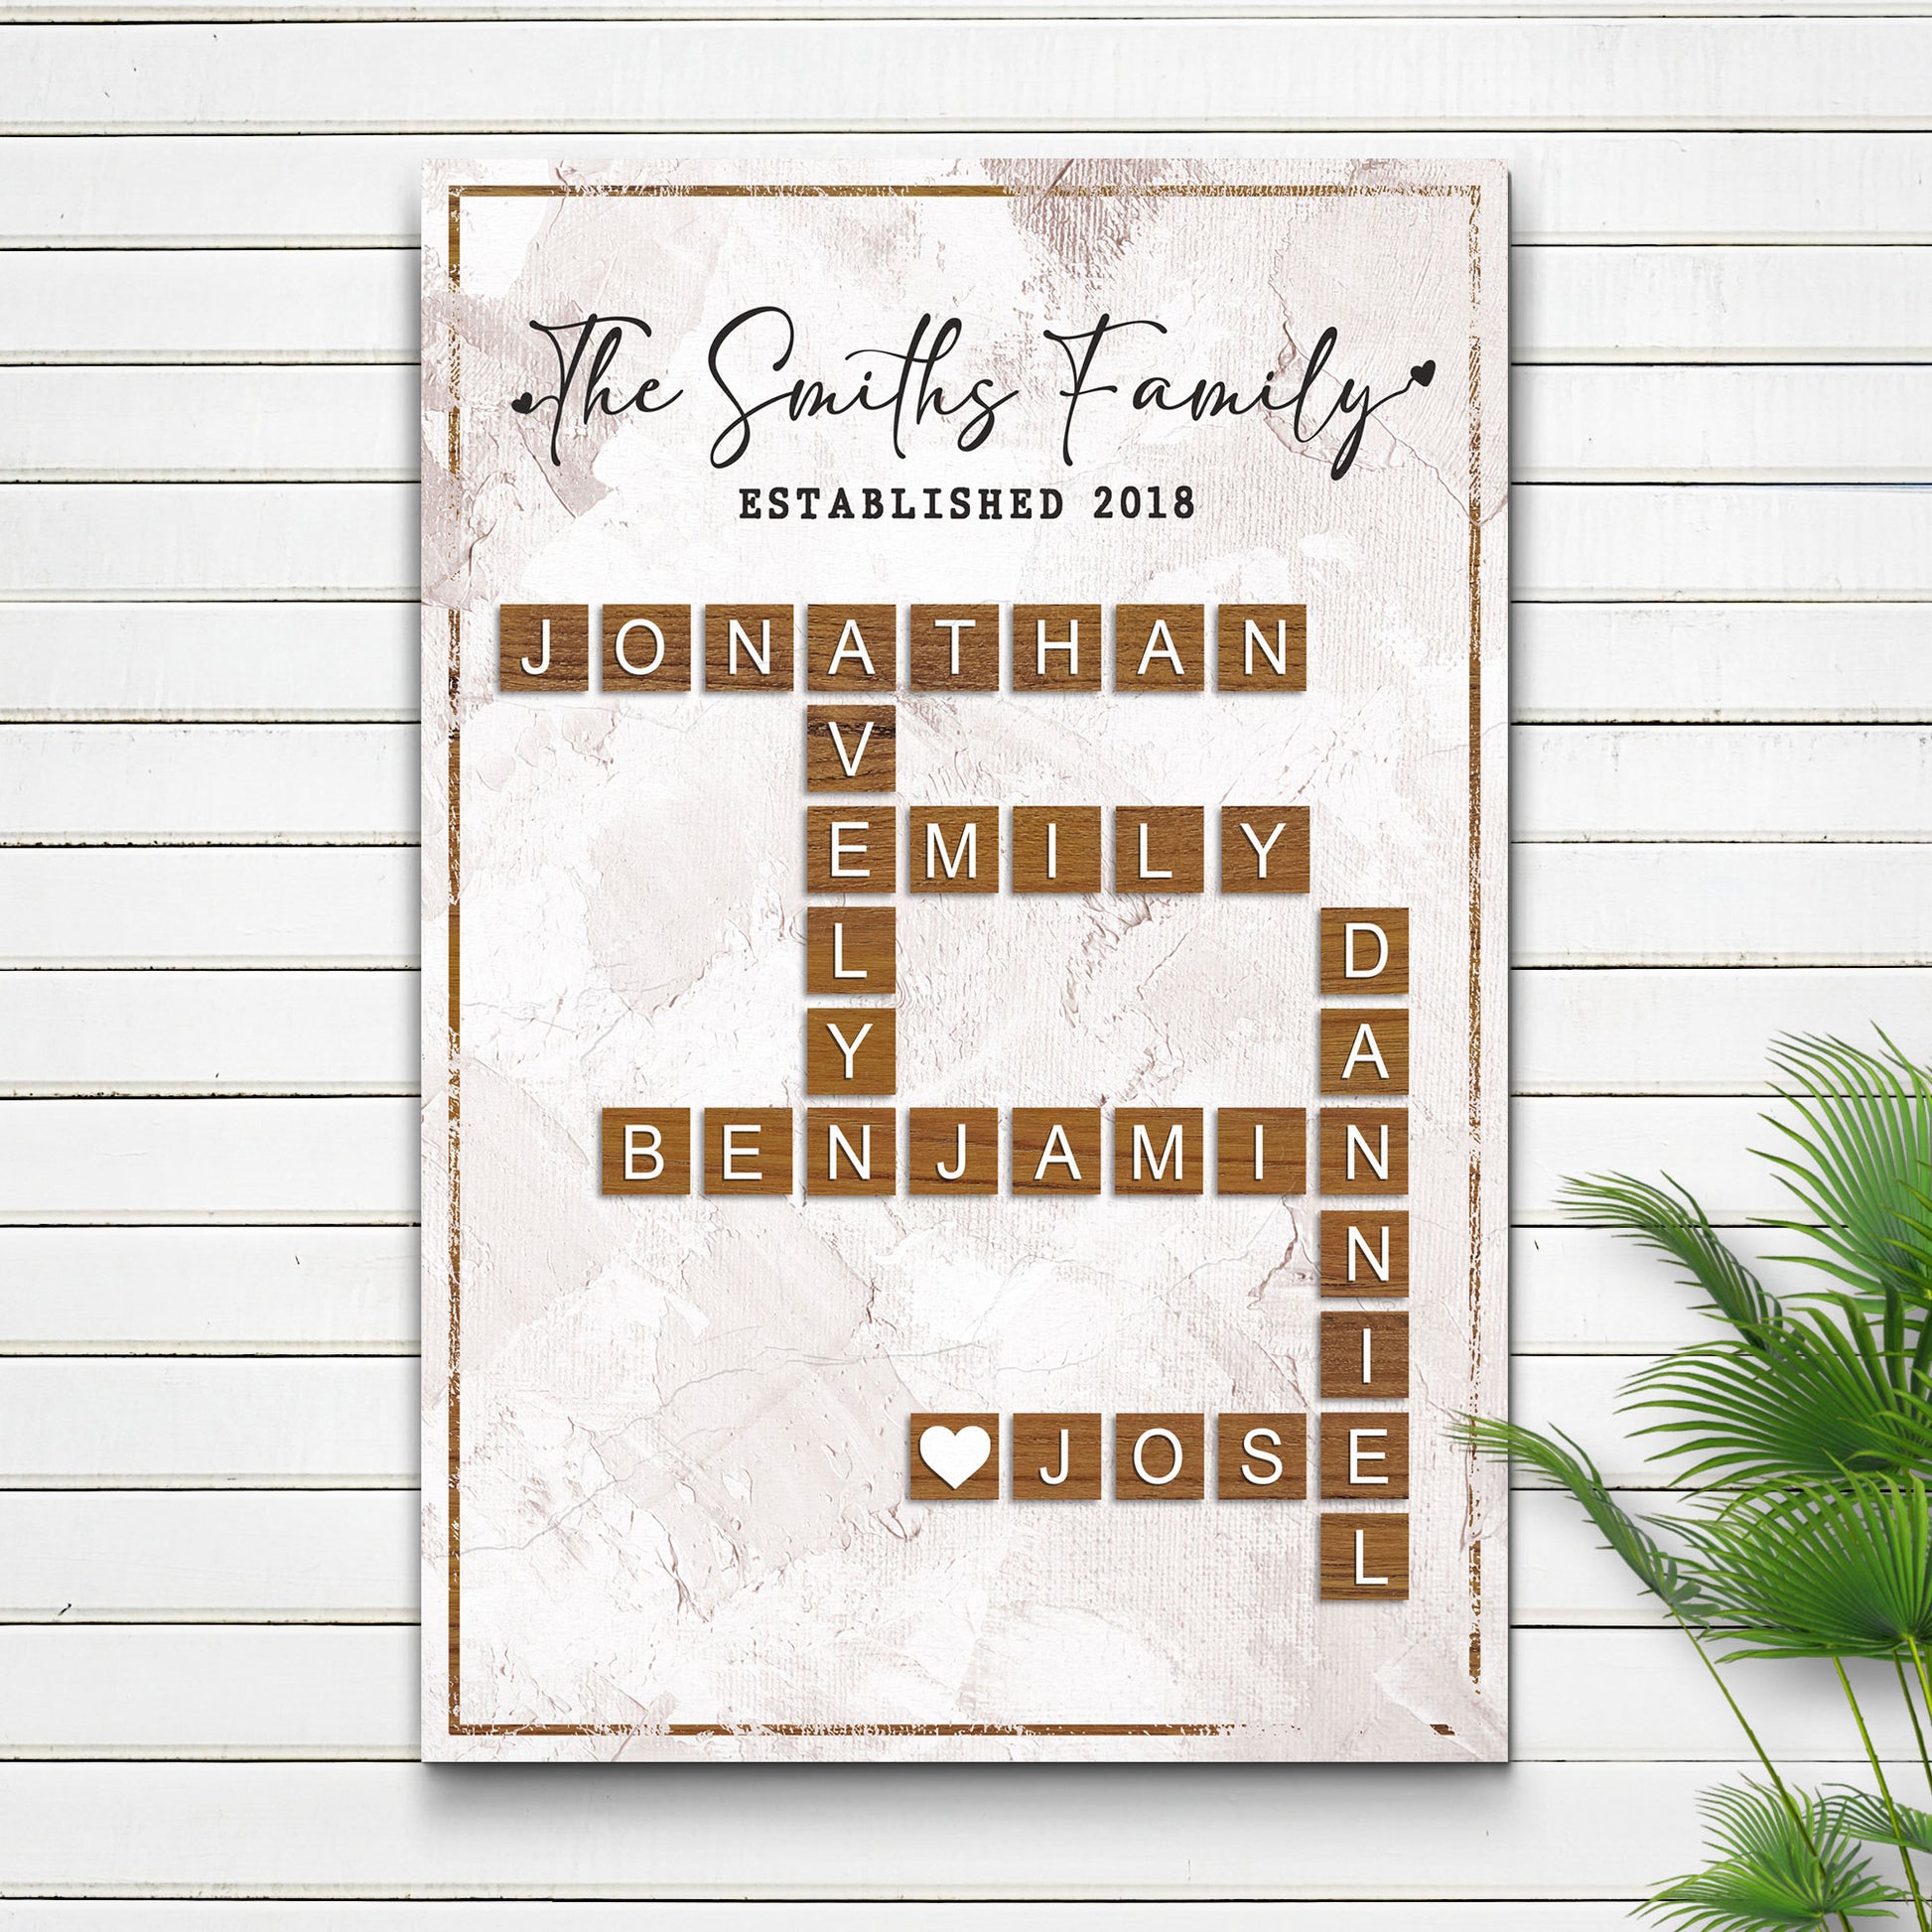 Scrabble Family Names Sign Style 1- Image by Tailored Canvases